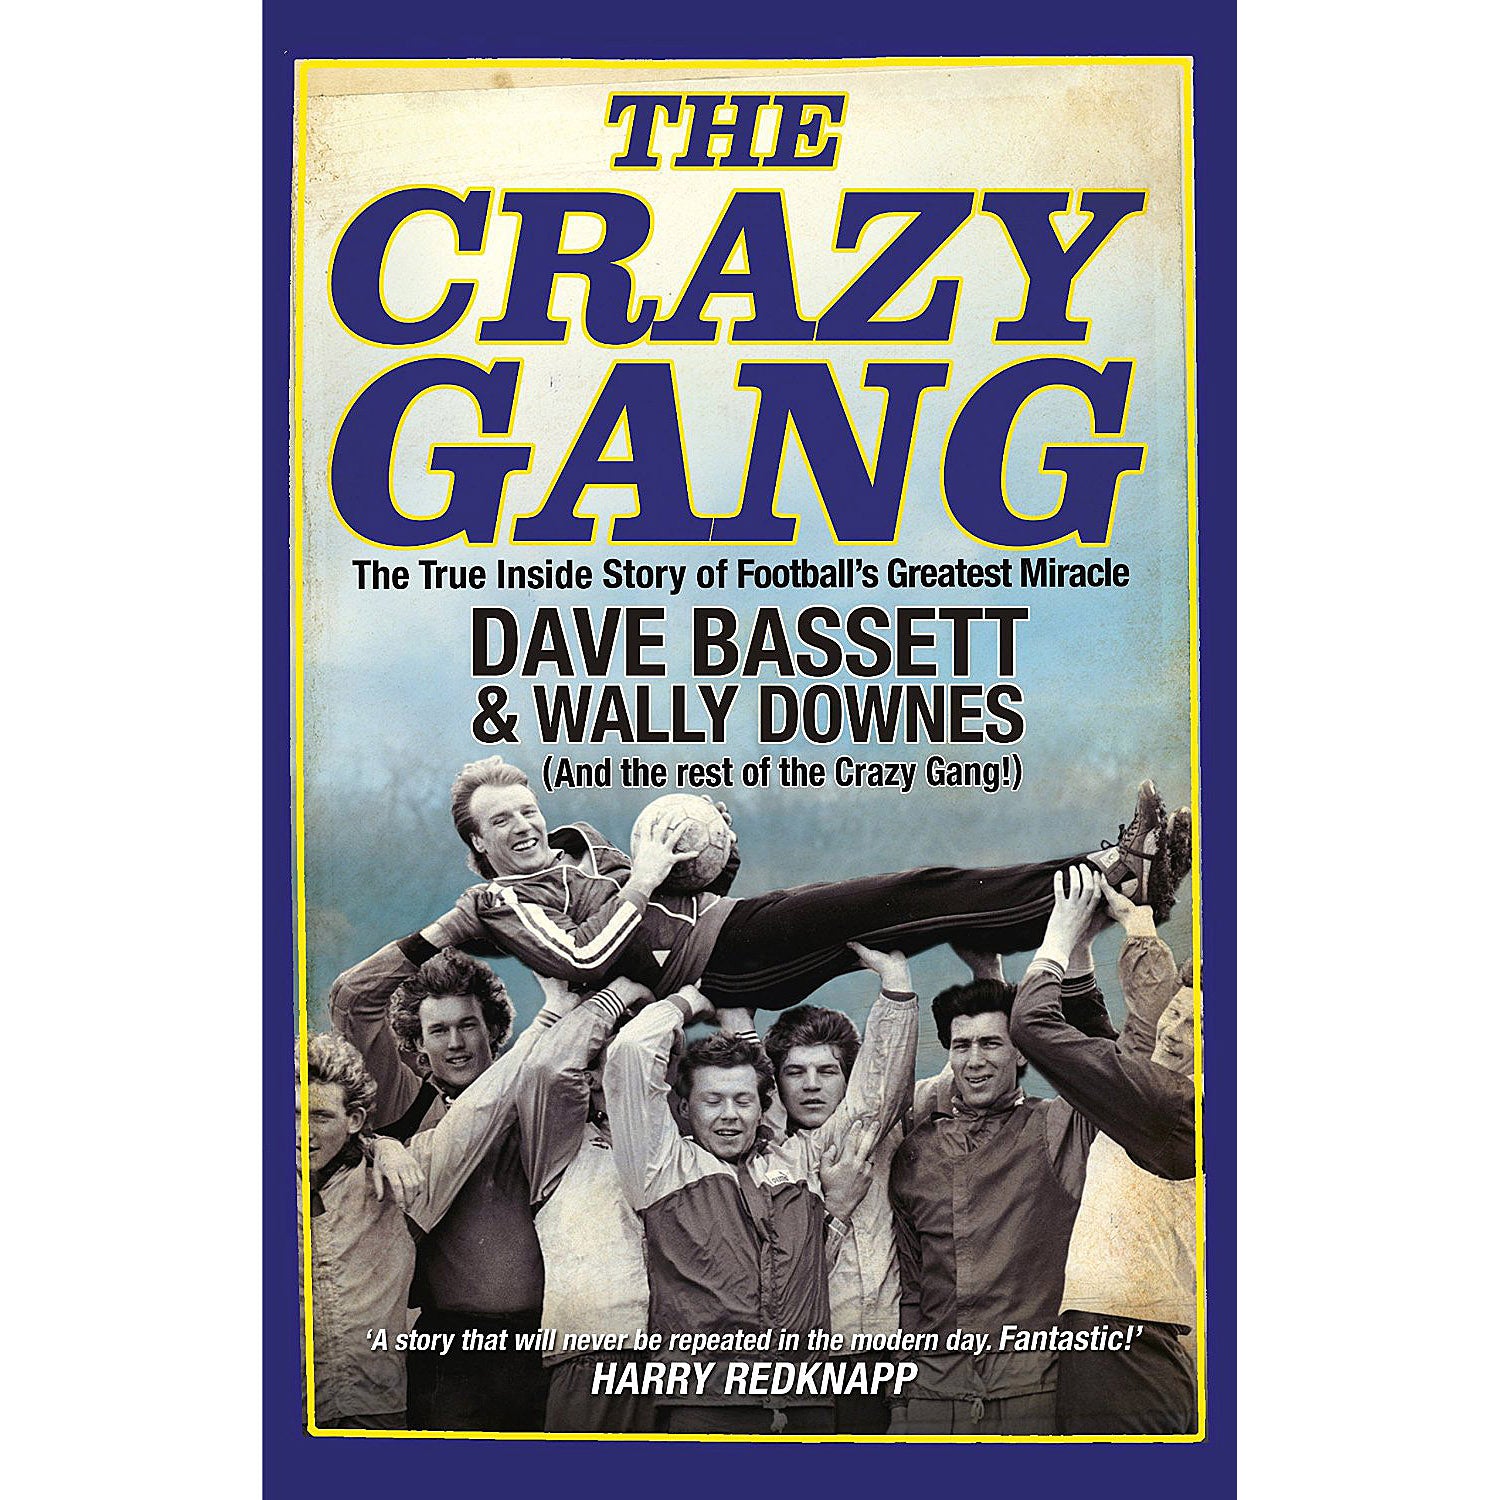 The Crazy Gang – The True Inside Story of Football's Greatest Miracle